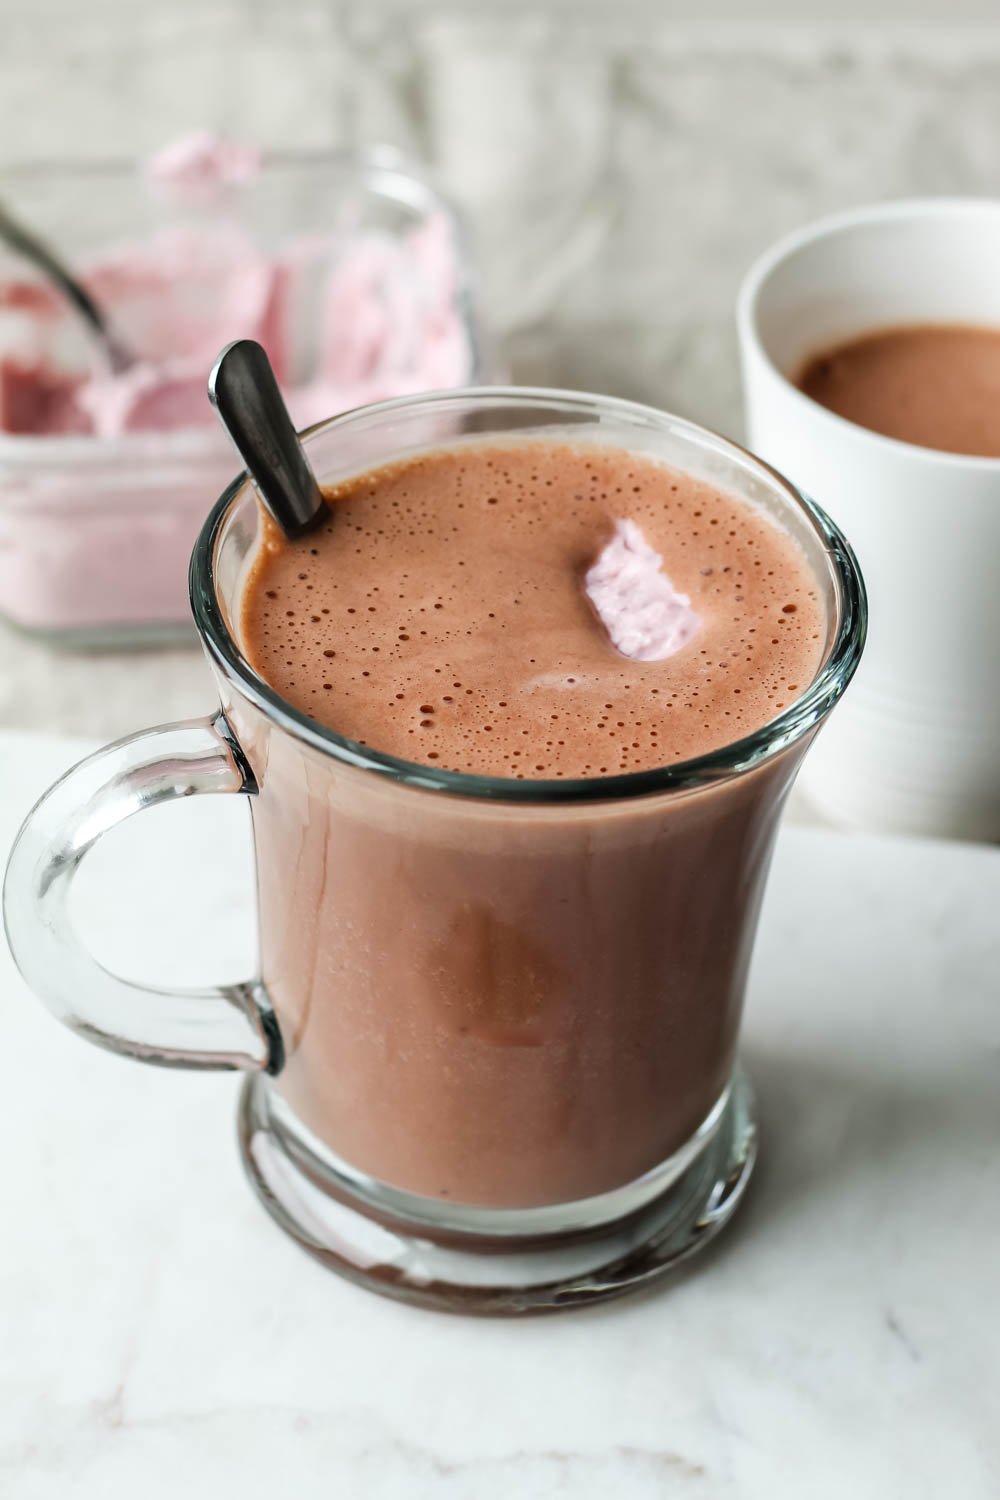 featured image for post showing a mug of raspberry hot chocolate topped with coconut whipped cream